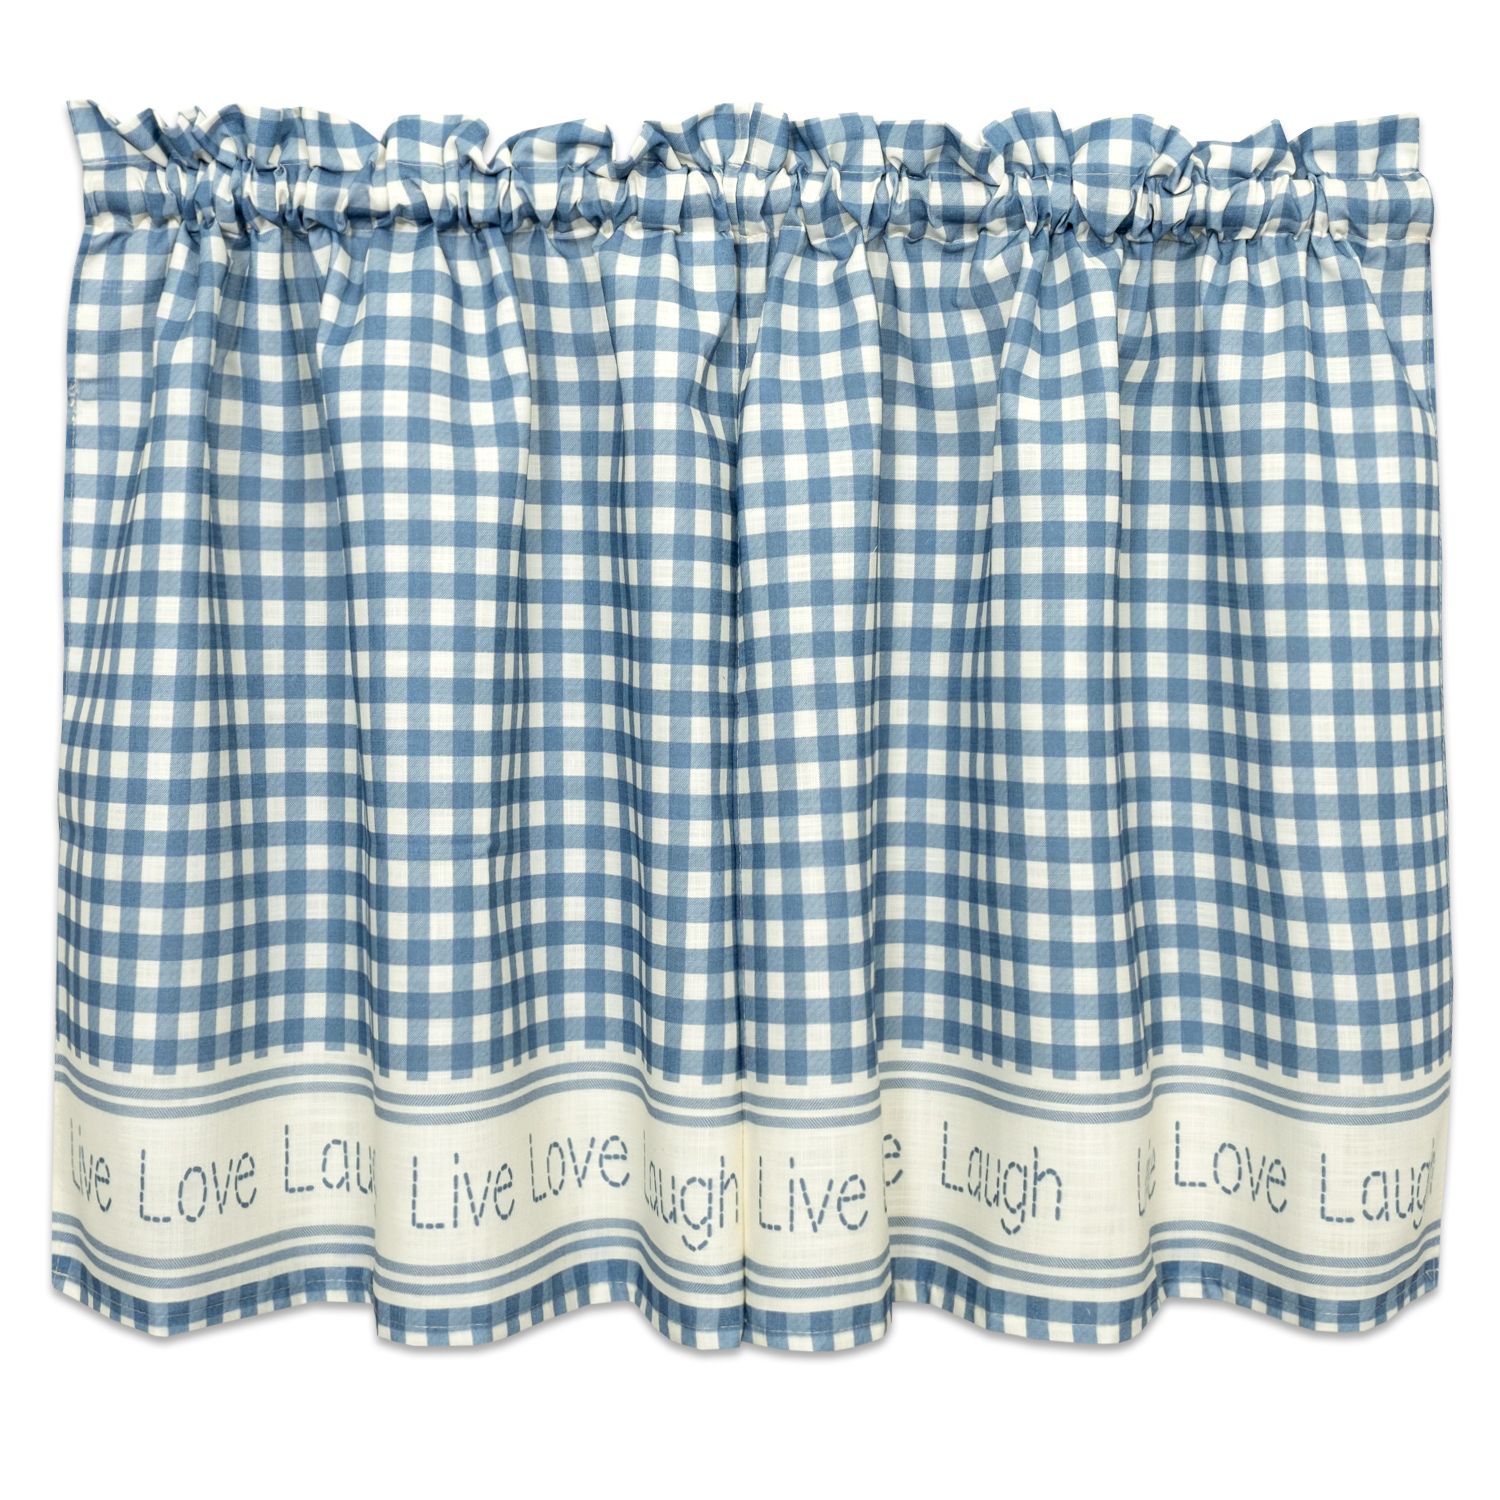 Gingham Stitch Live Laugh Love Kitchen Curtain Tier Pair Or Valance Blue With Live, Love, Laugh Window Curtain Tier Pair And Valance Sets (View 6 of 20)